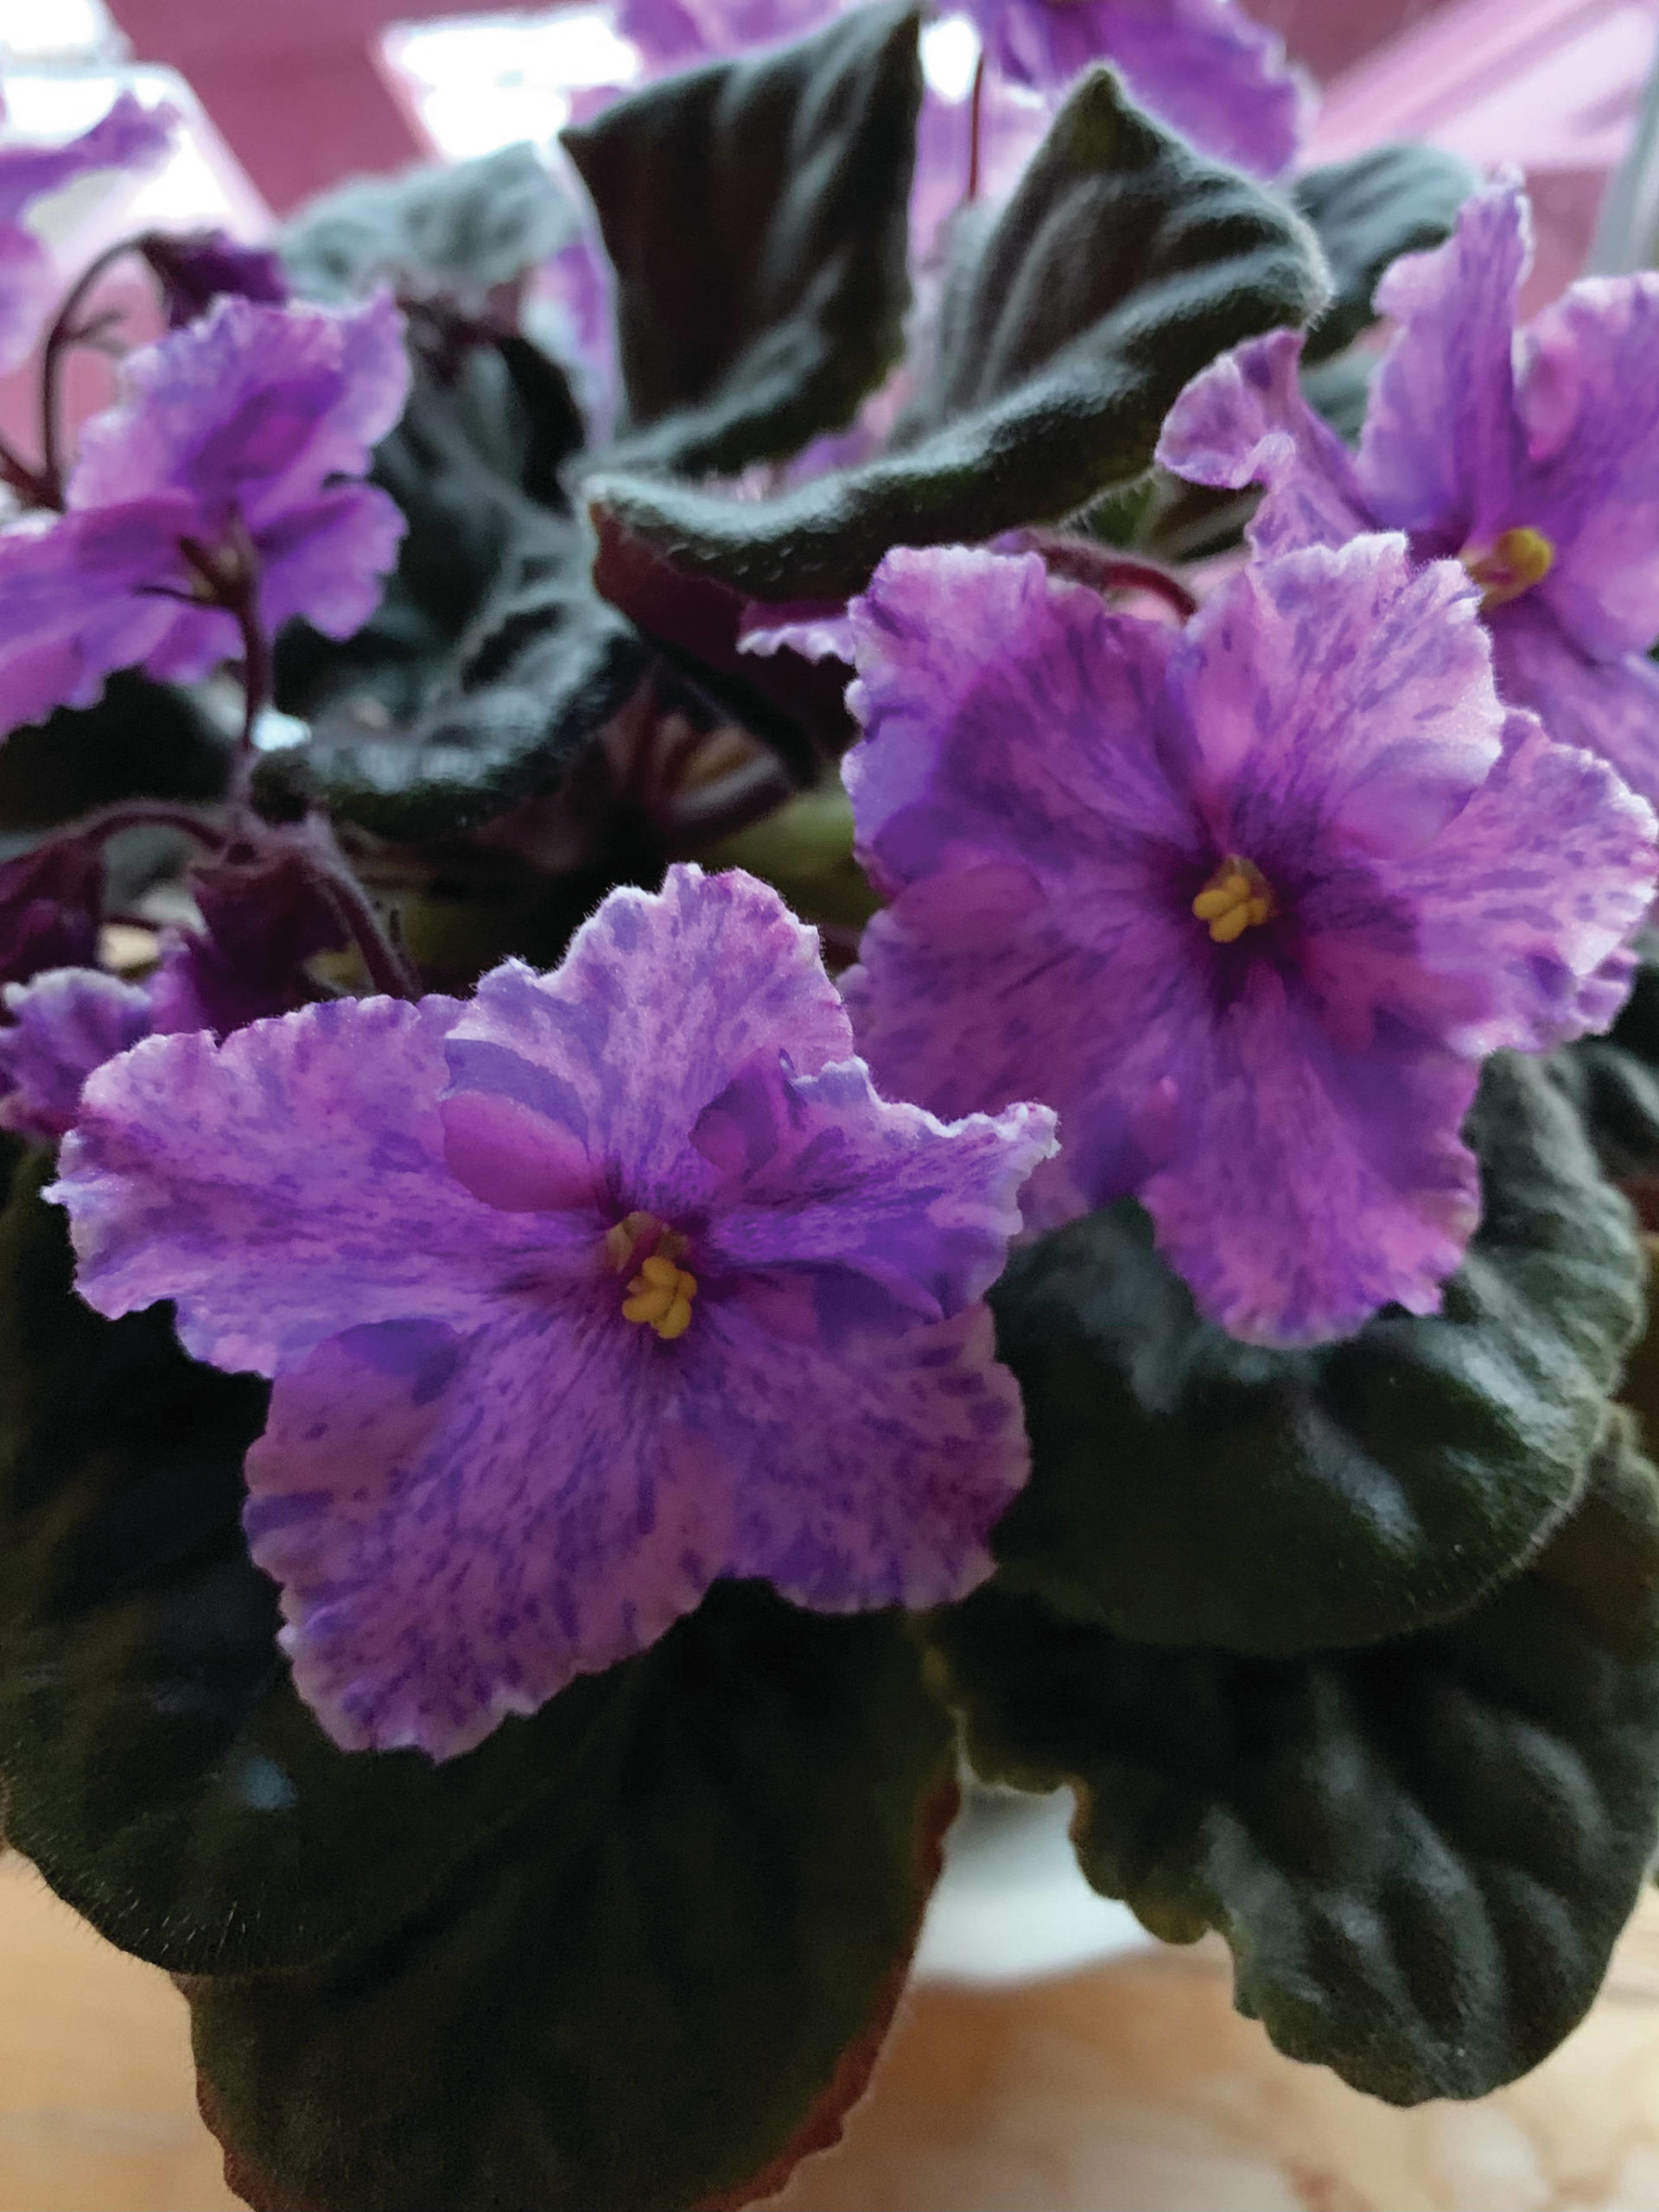 An African violet was started from seed about four years ago provides some spring cheer on April 4, 2021, at the home of the Kachemak Gardener in Homer, Alaska. (Photo by Rosemary Fitzpatrick)